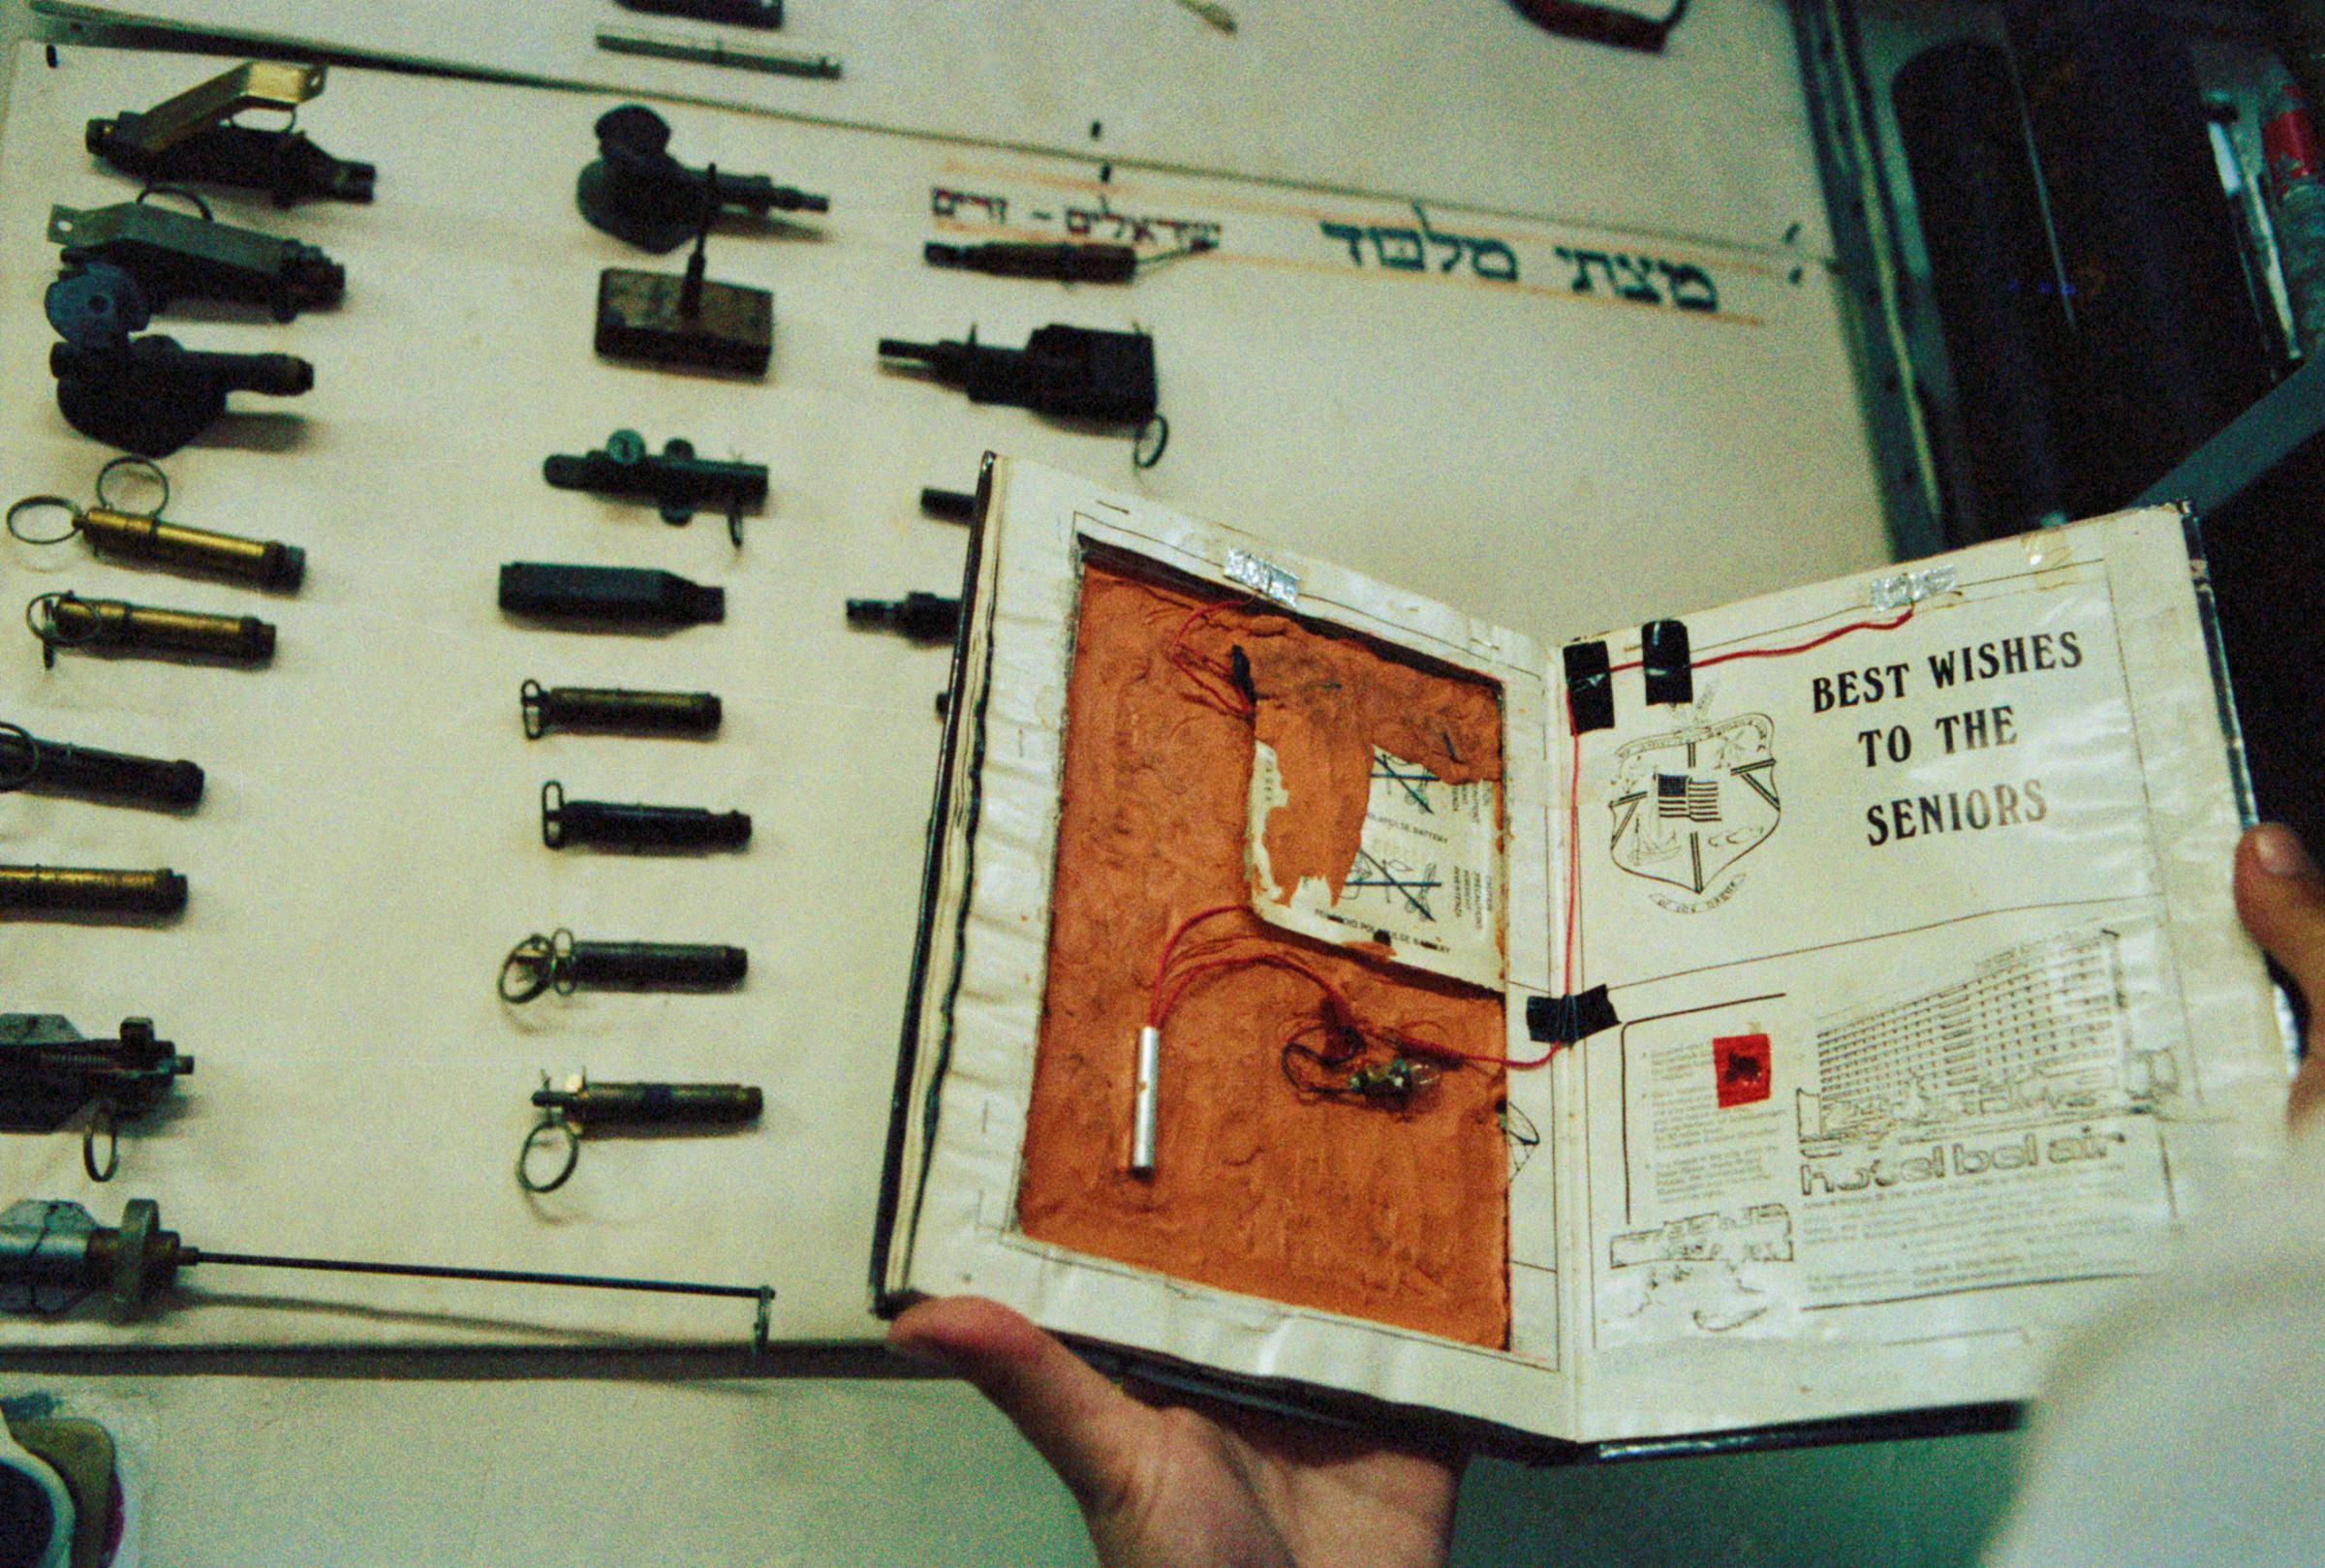 Common objects such as this school yearbook are turned into bombs precisely because they are so tempting for people to pick up. The chart on the wall shows the wide variety of detonators used to set off the explosive charge, which in the case of the book was an easy-to-mold plastic compound.